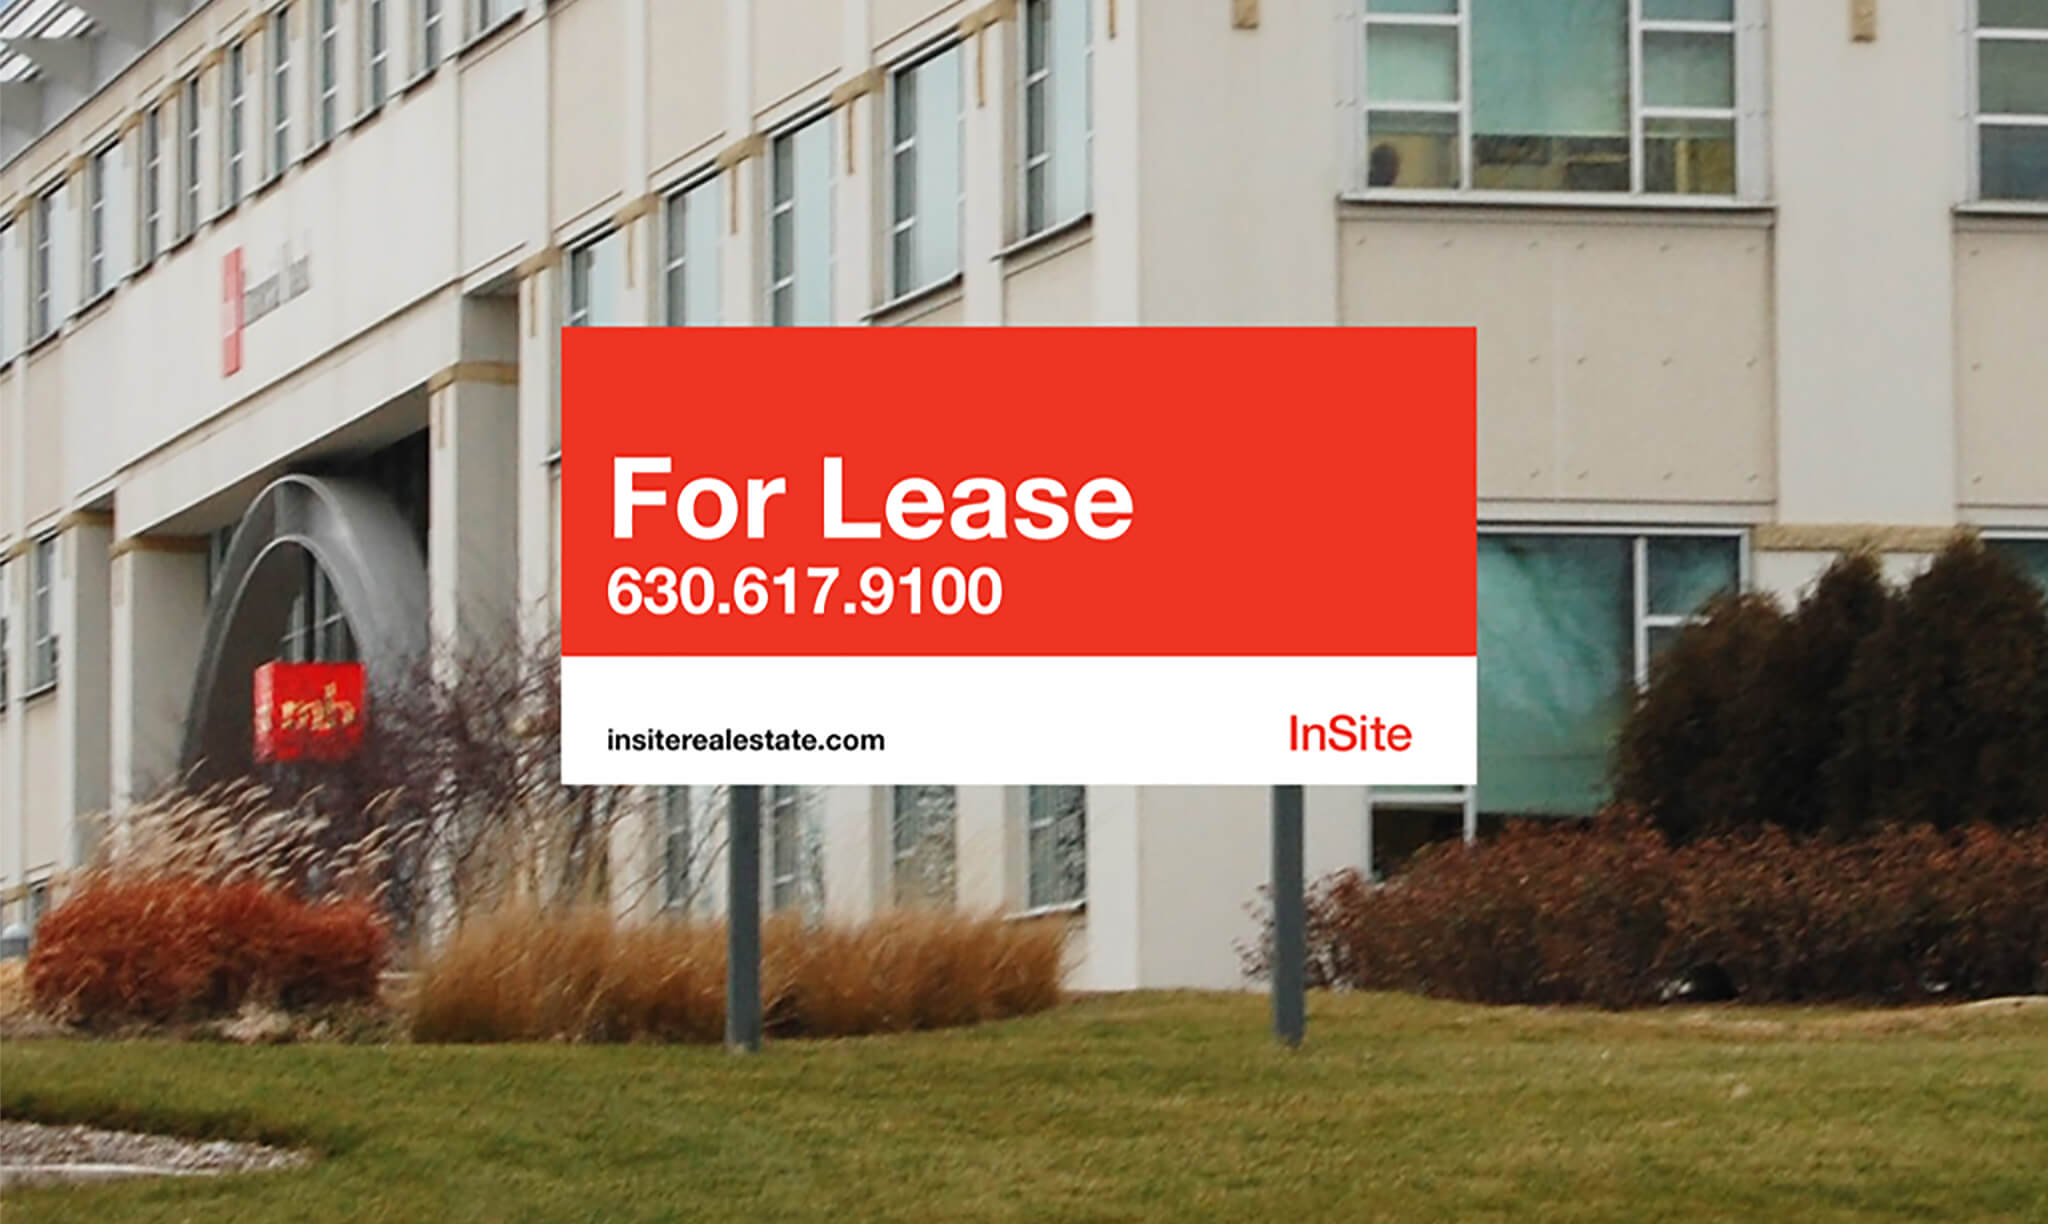 InSite Real Estate Leasing Sign